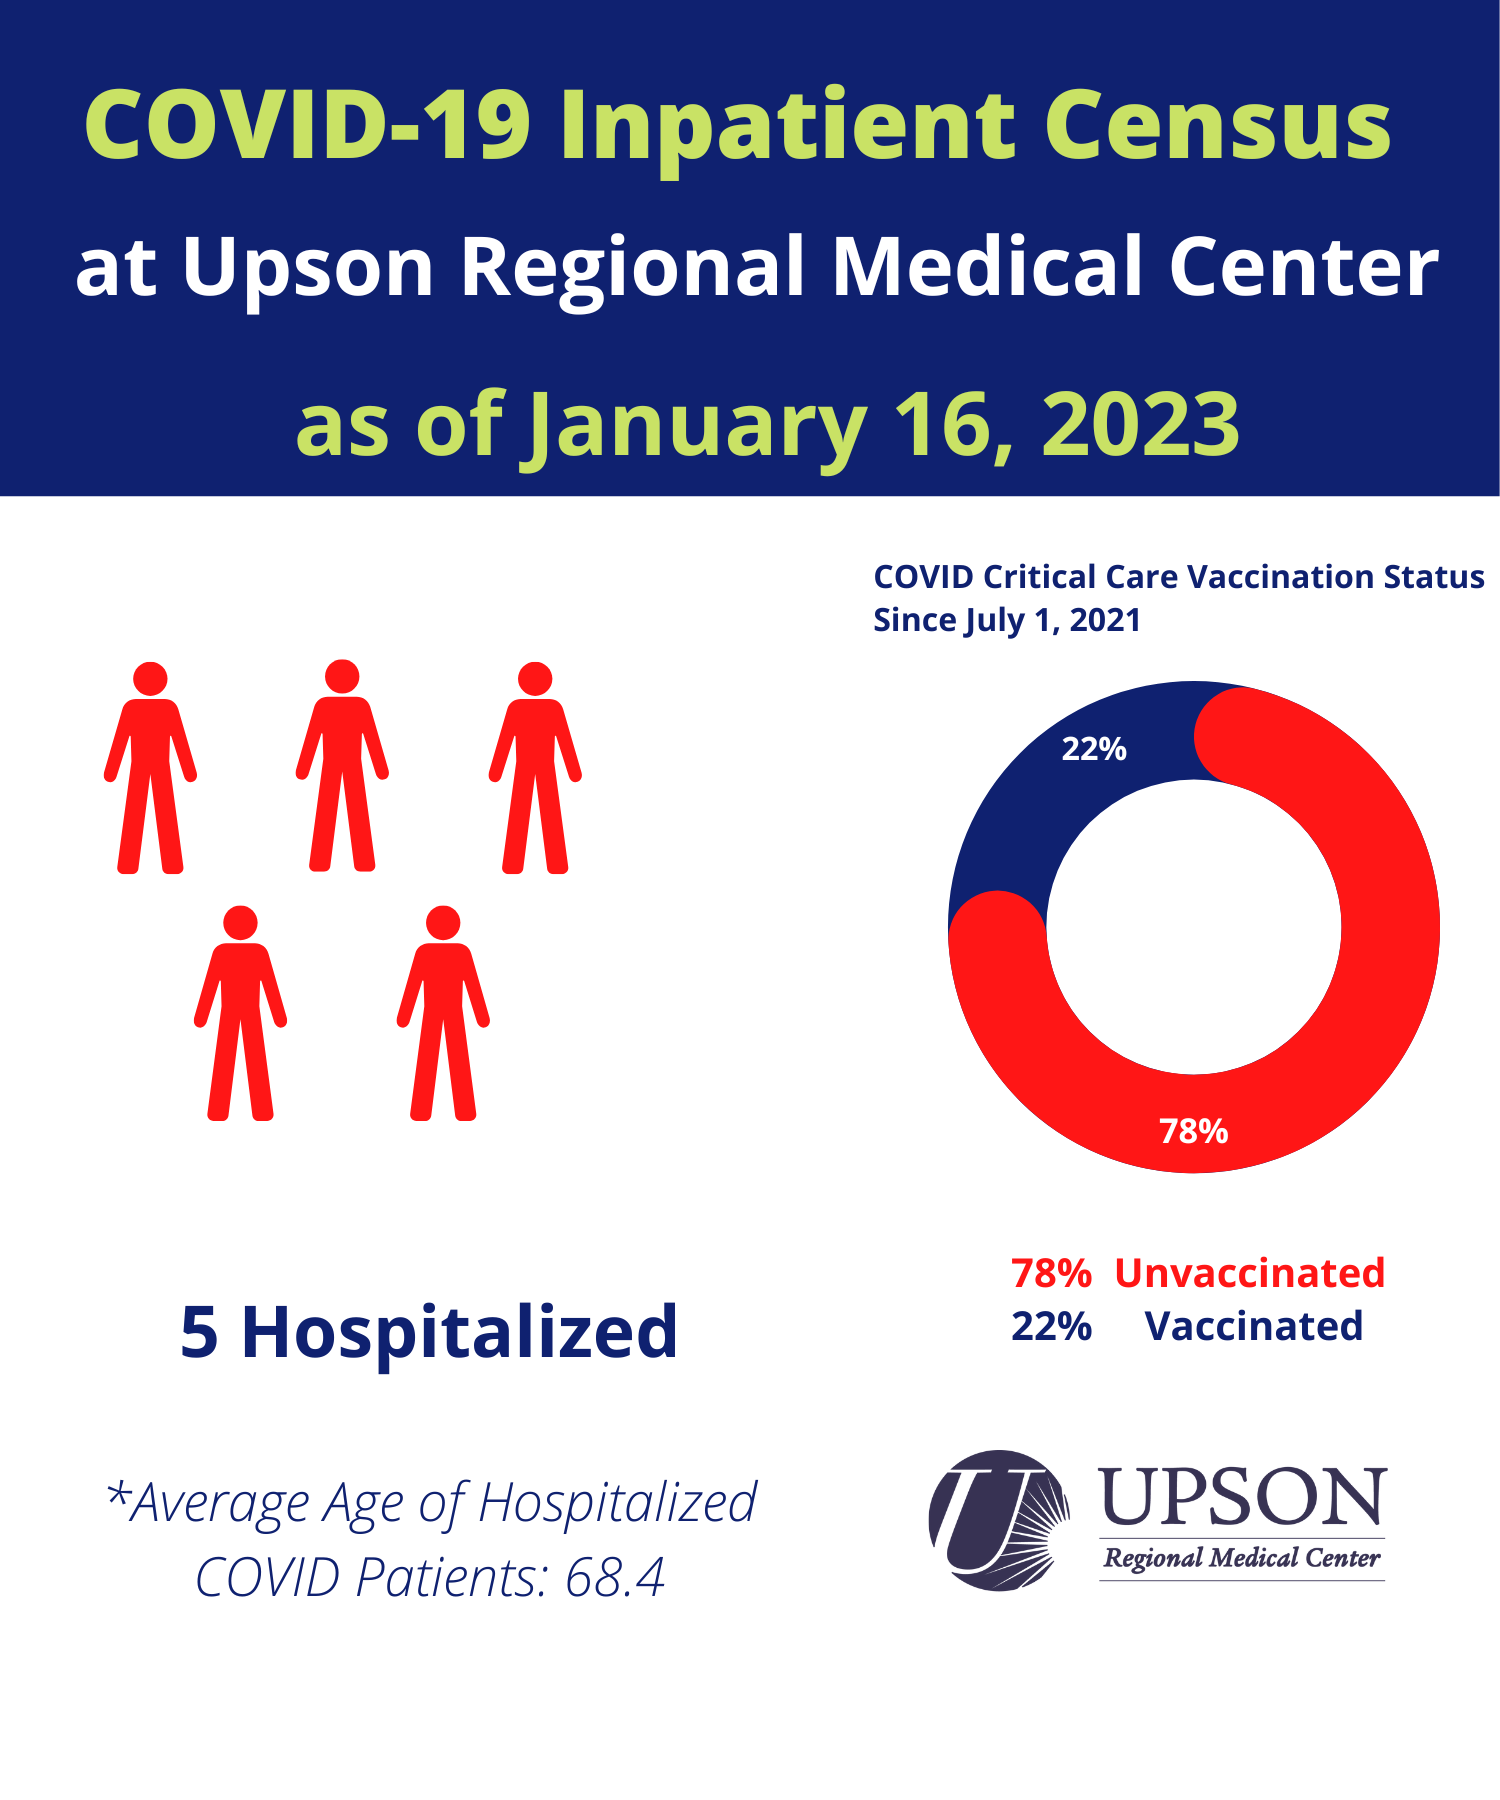 Photo for URMC COVID-19 inpatient status as of January 16, 2023.